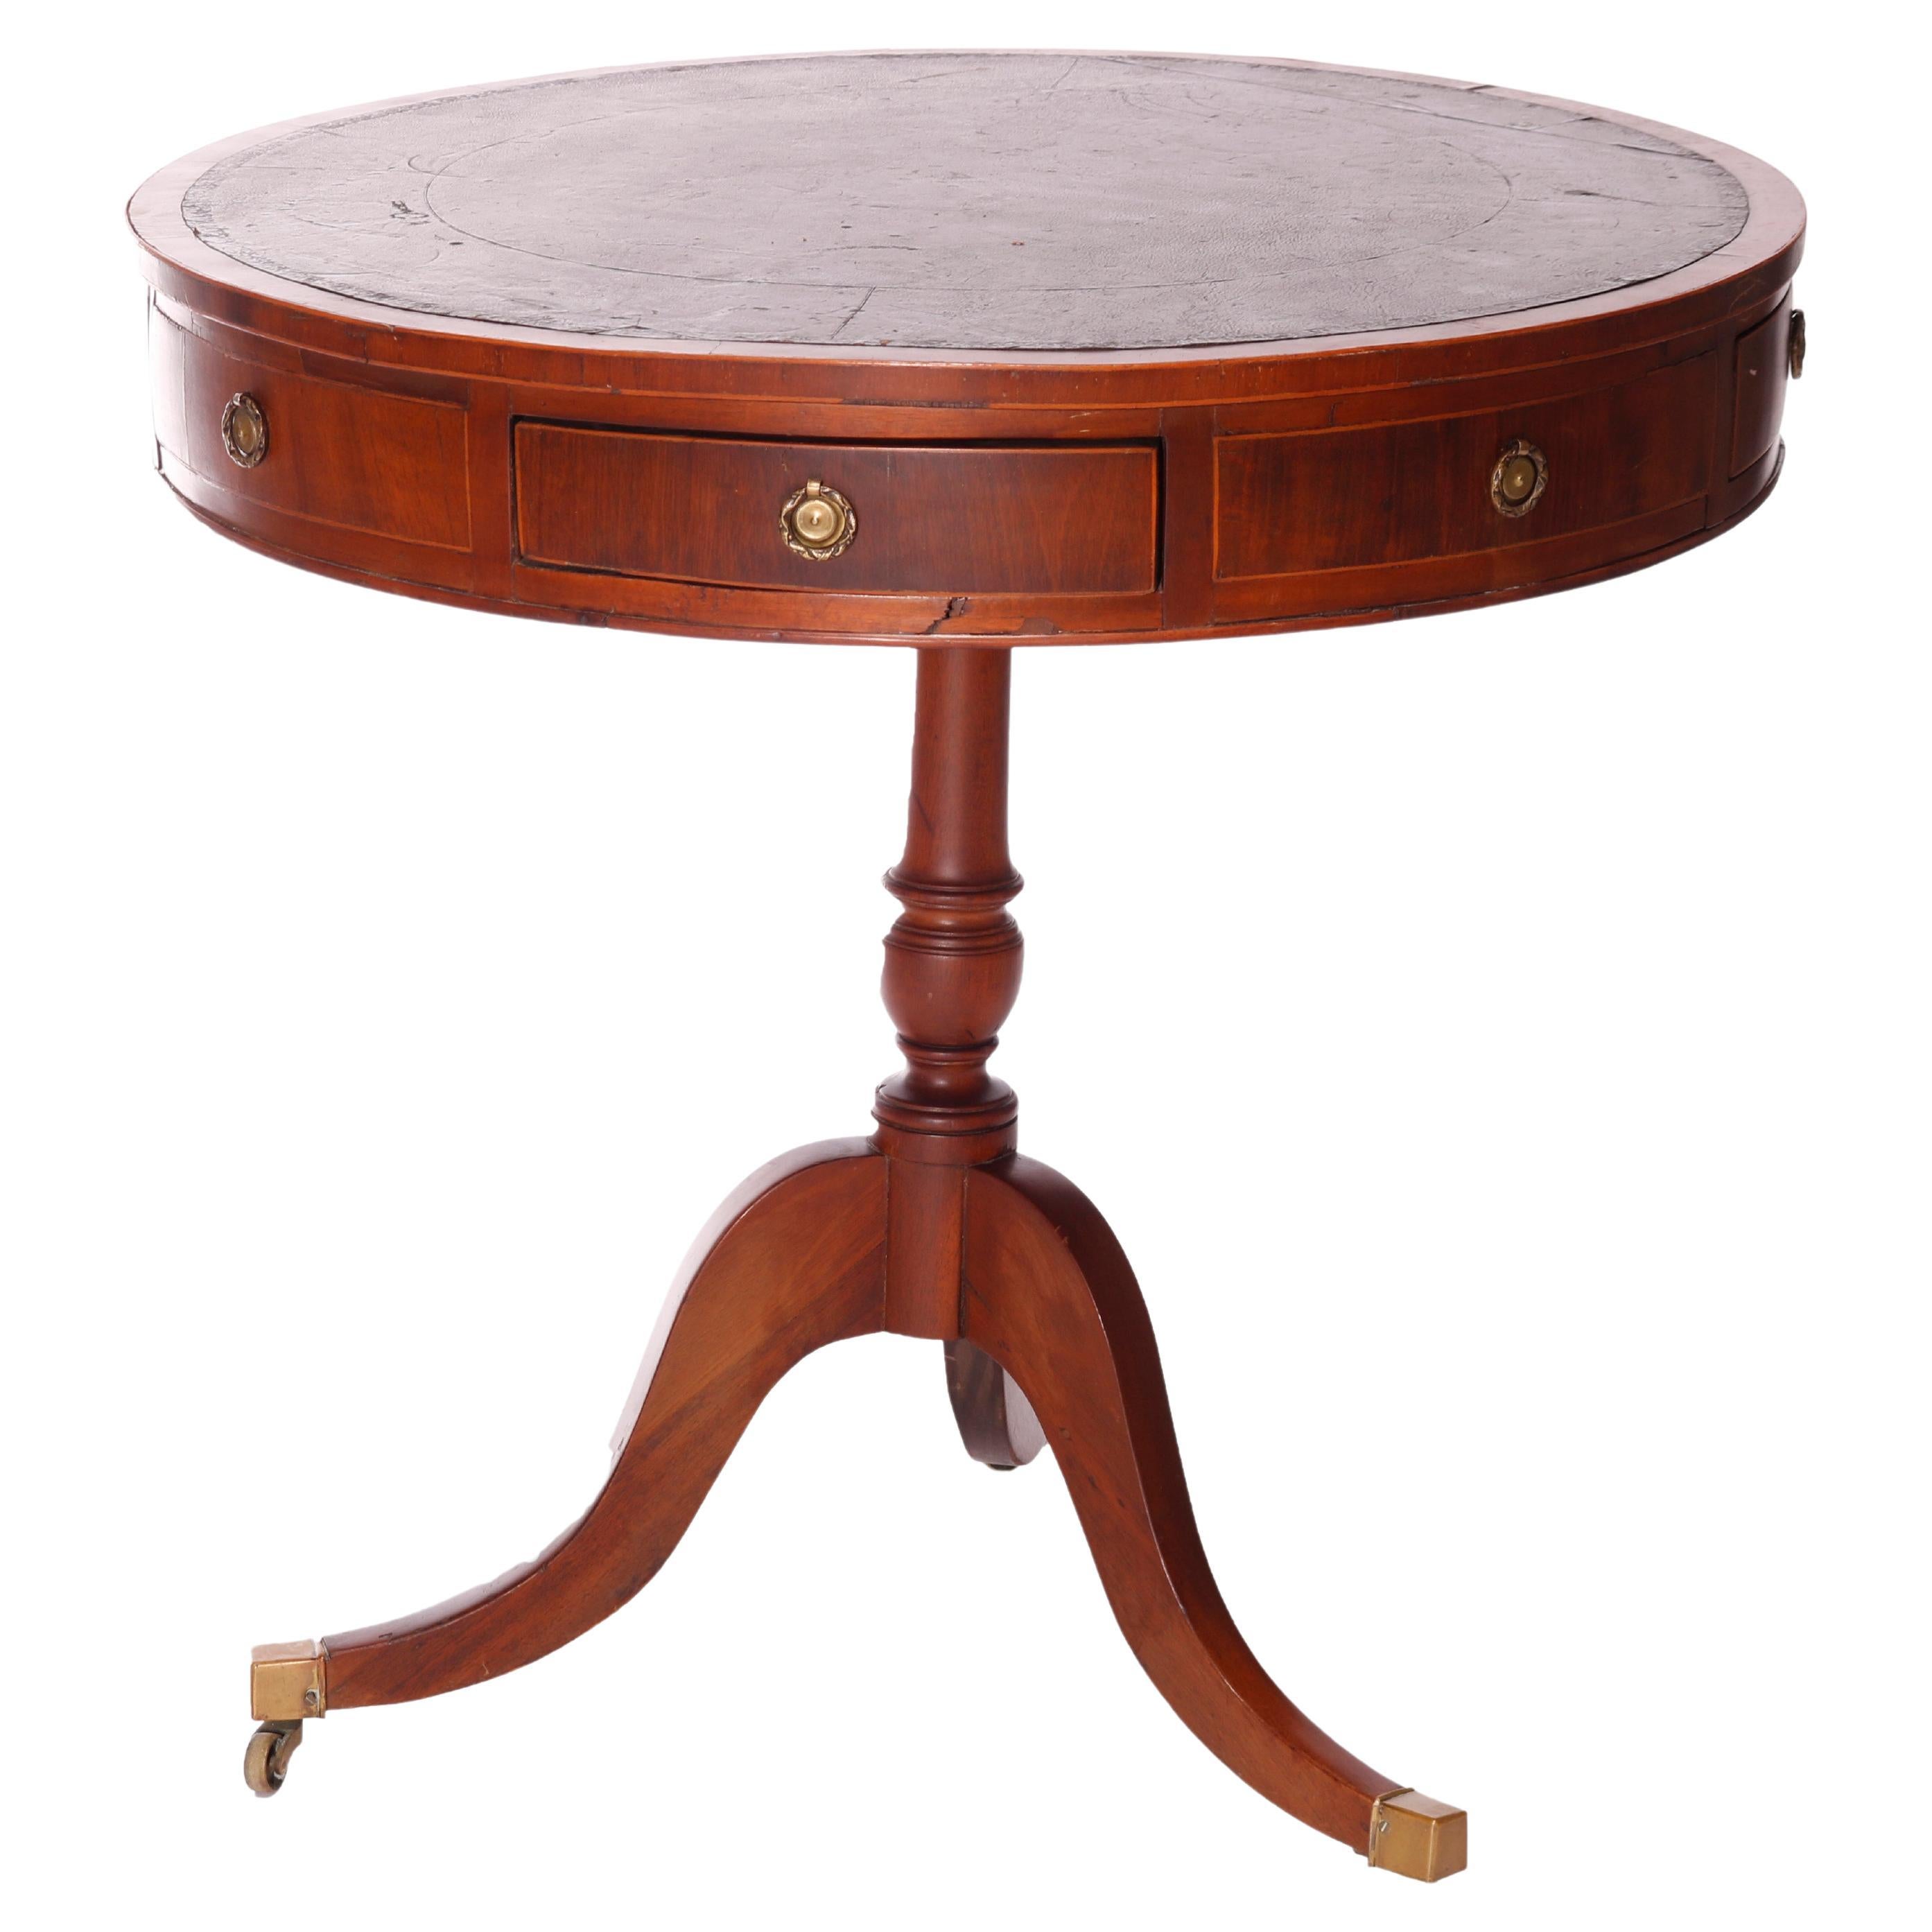  Antique English George III Mahogany Drum Game Table Circa 1820 For Sale